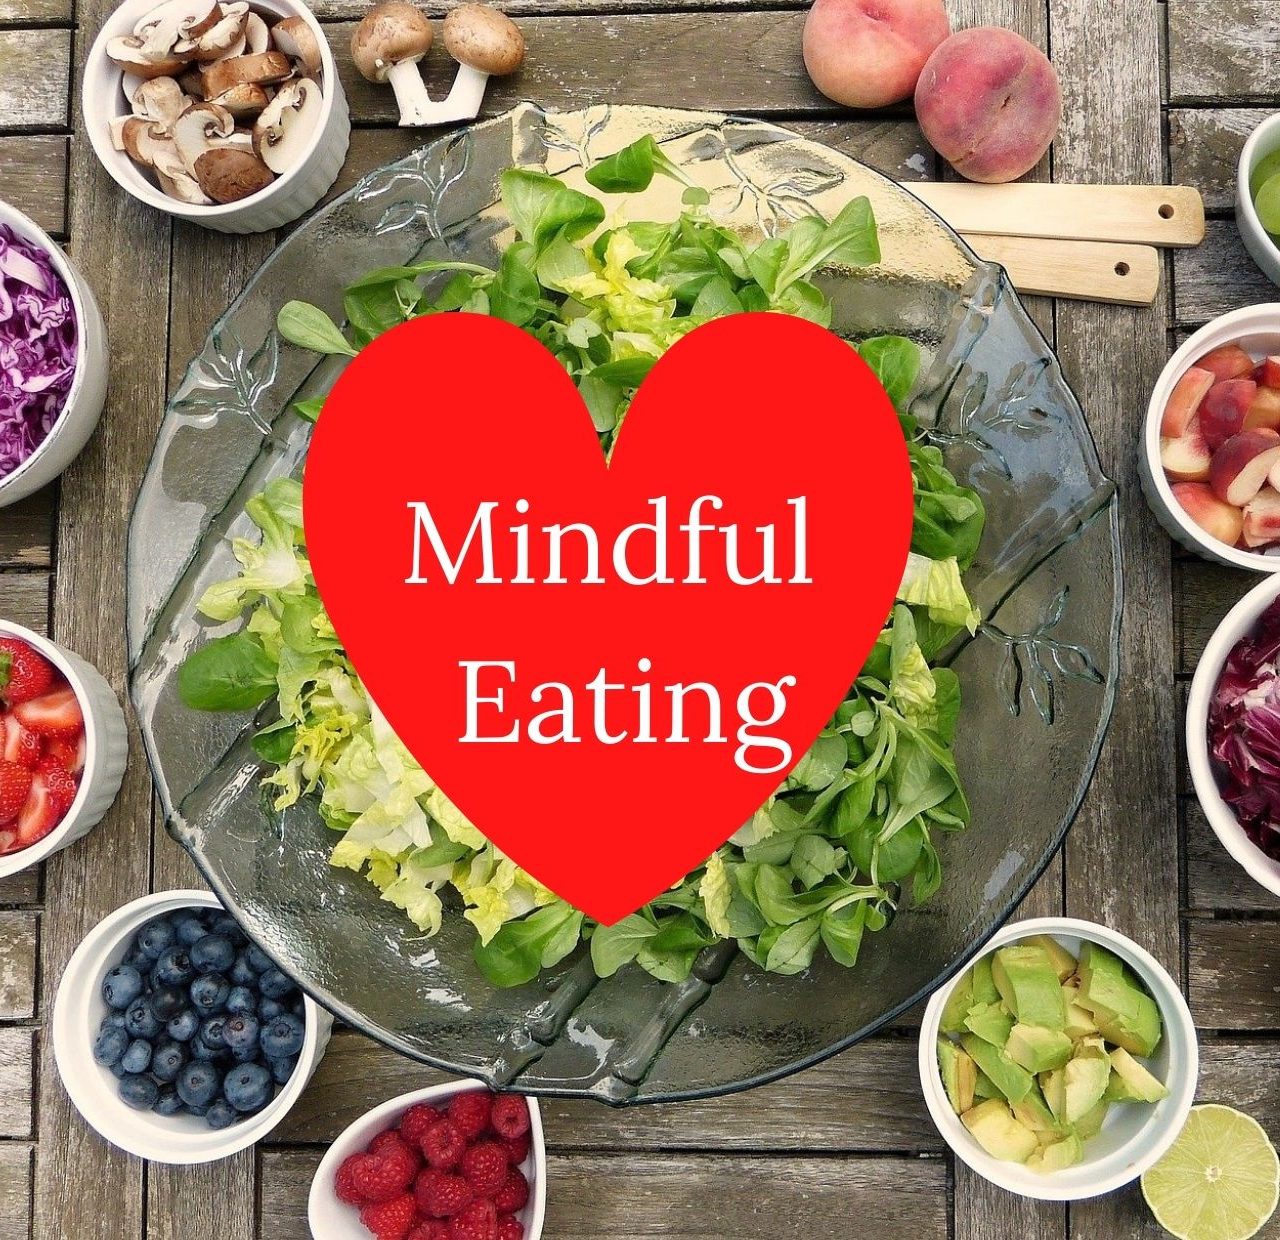 https://www.chiaradicesare.it/wp-content/uploads/2022/03/Mindful-eating-1280x1240.jpg